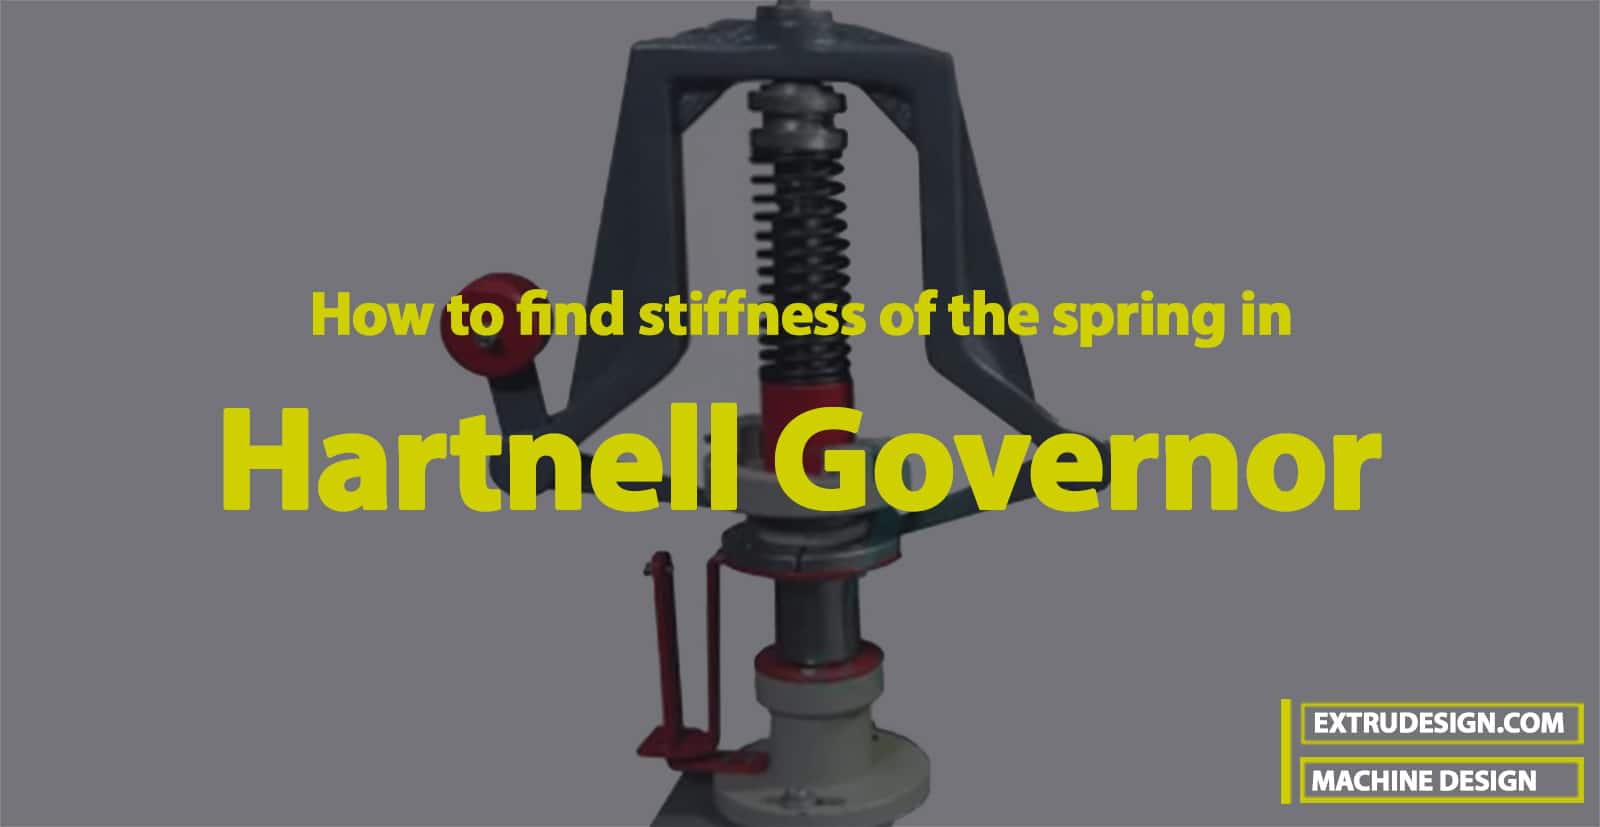 Find stiffness of the spring in Hartnell Governor